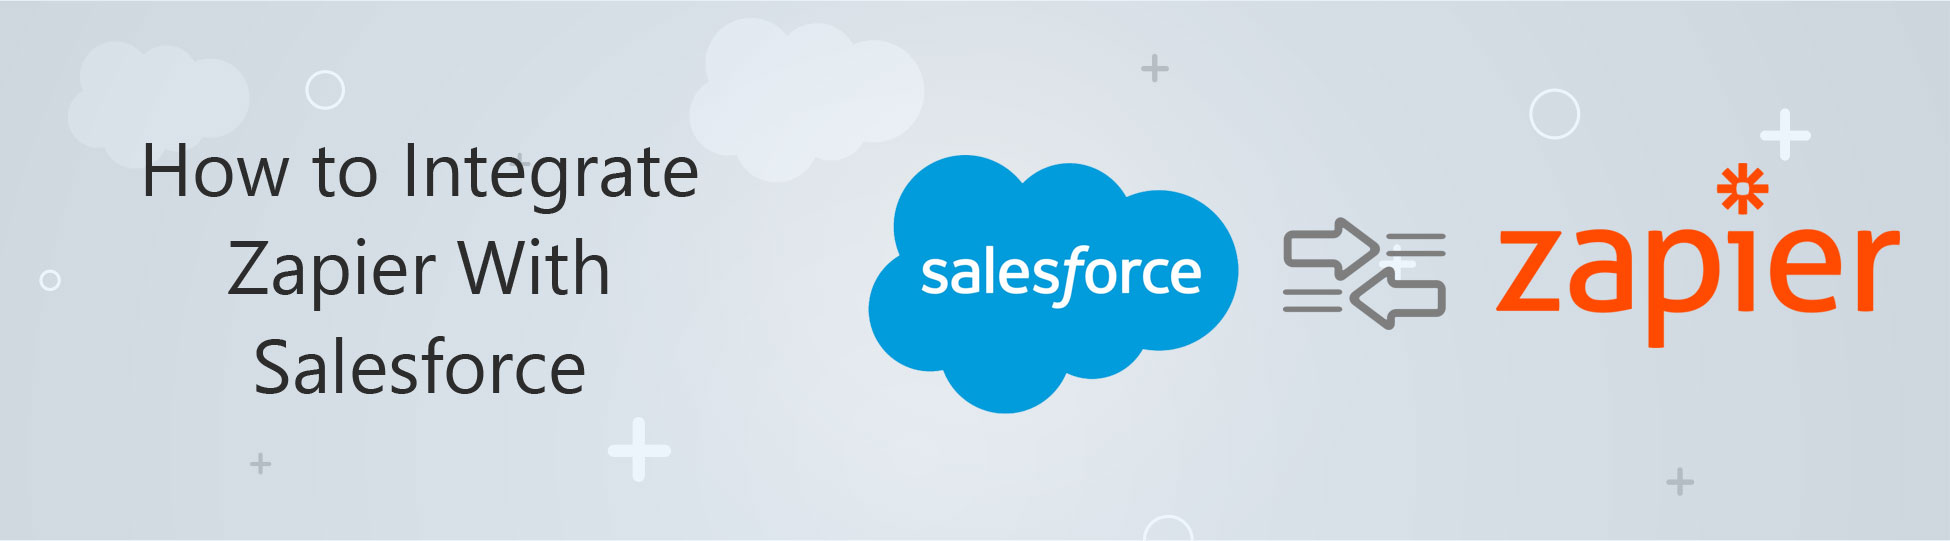 How-to-Integrate-Zapier-With-Salesforce